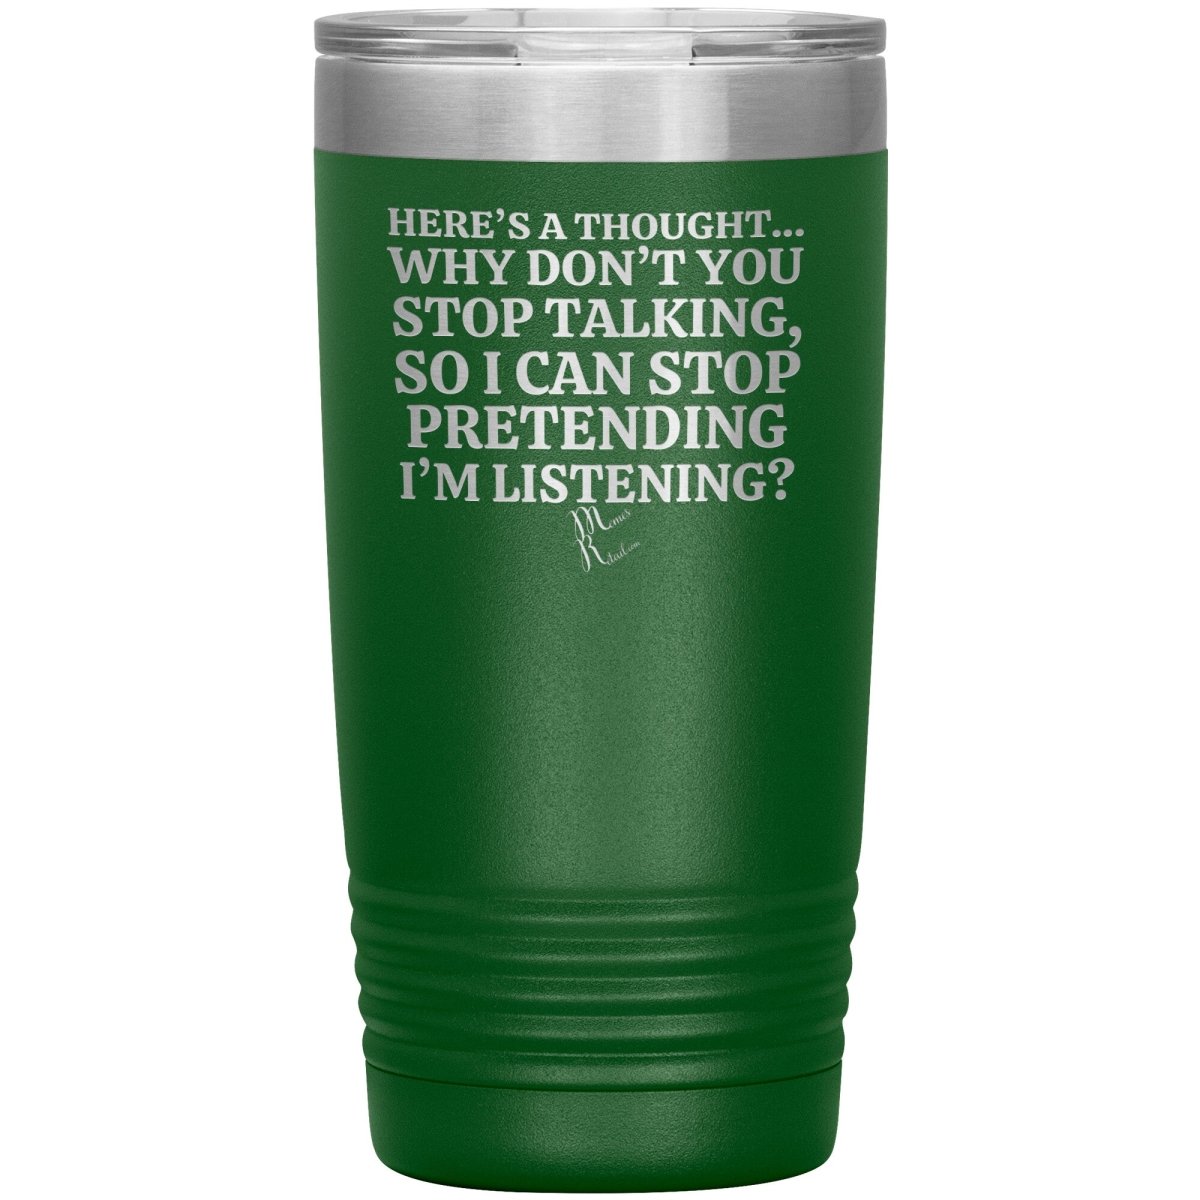 Here's A Thought...Why Don't You Stop Talking Tumblers, 20oz Insulated Tumbler / Green - MemesRetail.com